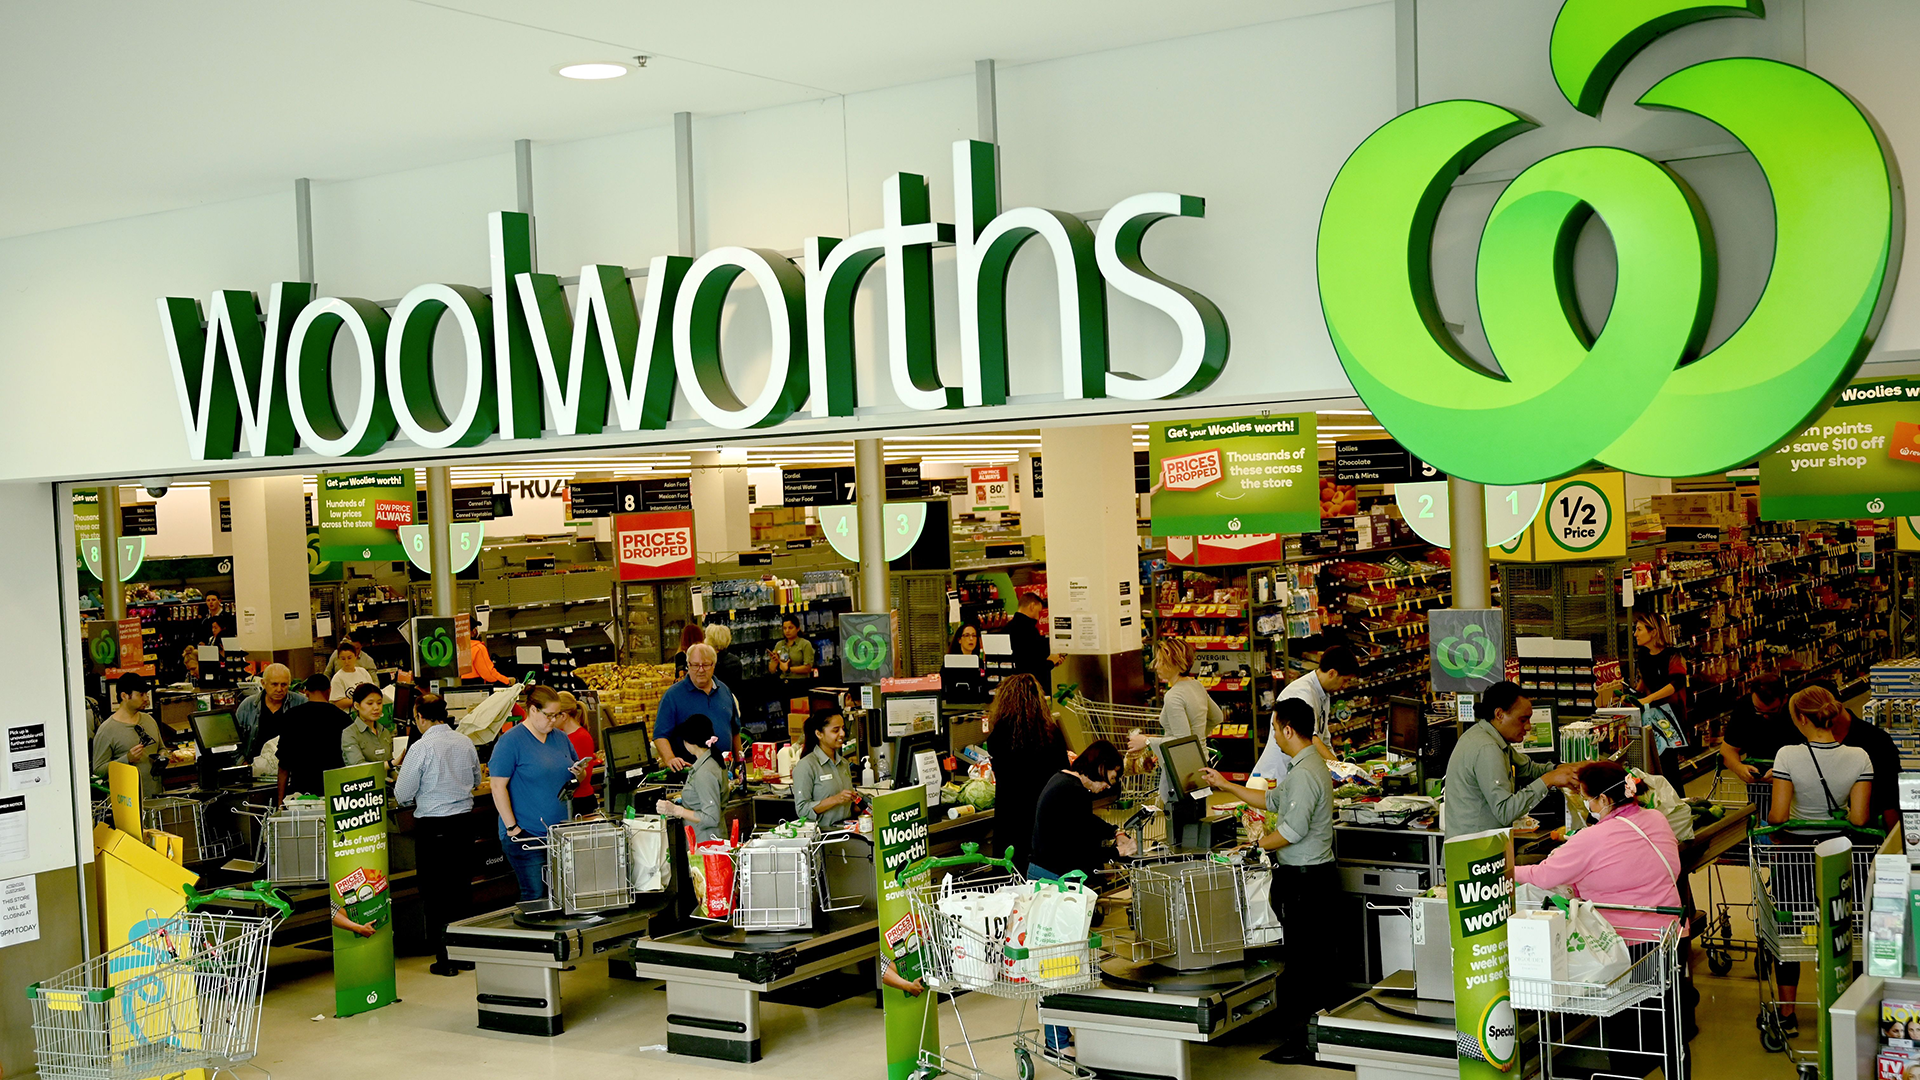 Australians Warned To Ignore Awful Covid-19 Scam That Uses Woolworths Name